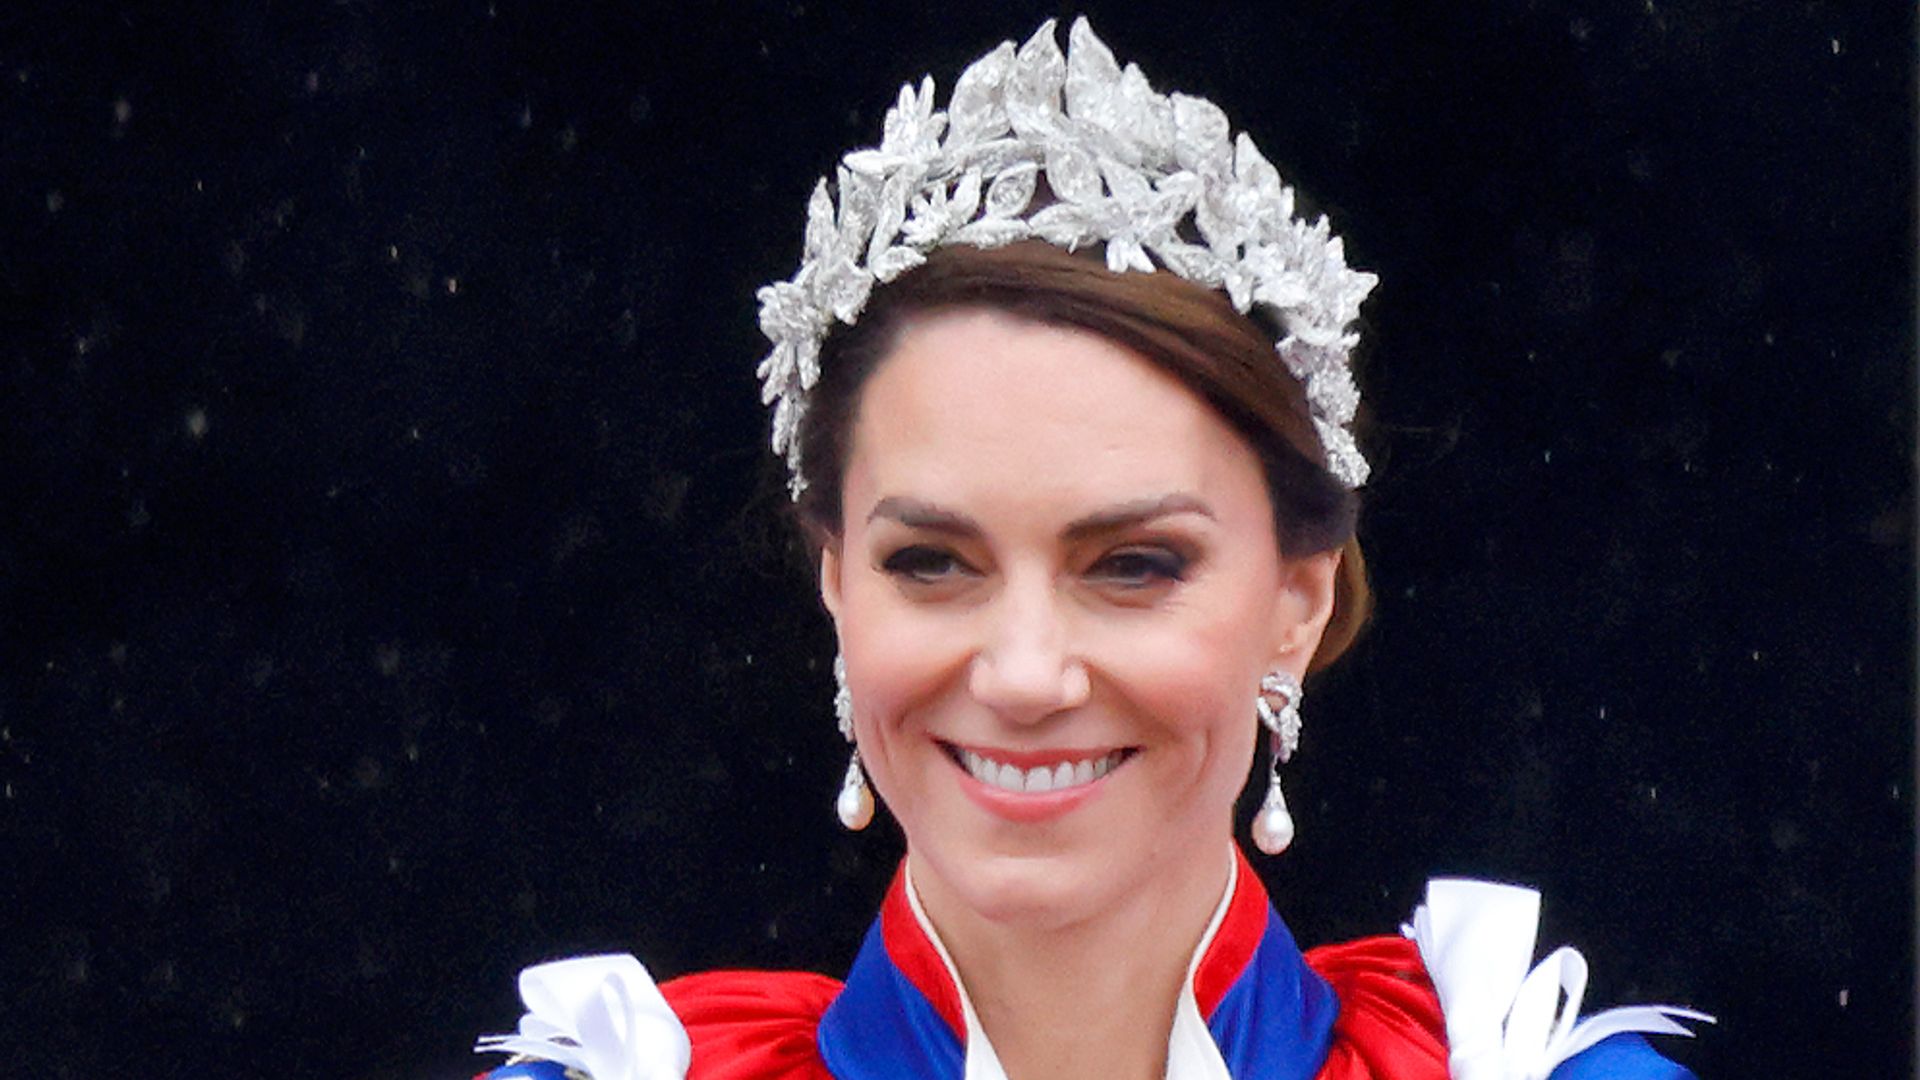 Did Princess Kate's Coronation dress look familiar? Here's where you've seen it before...